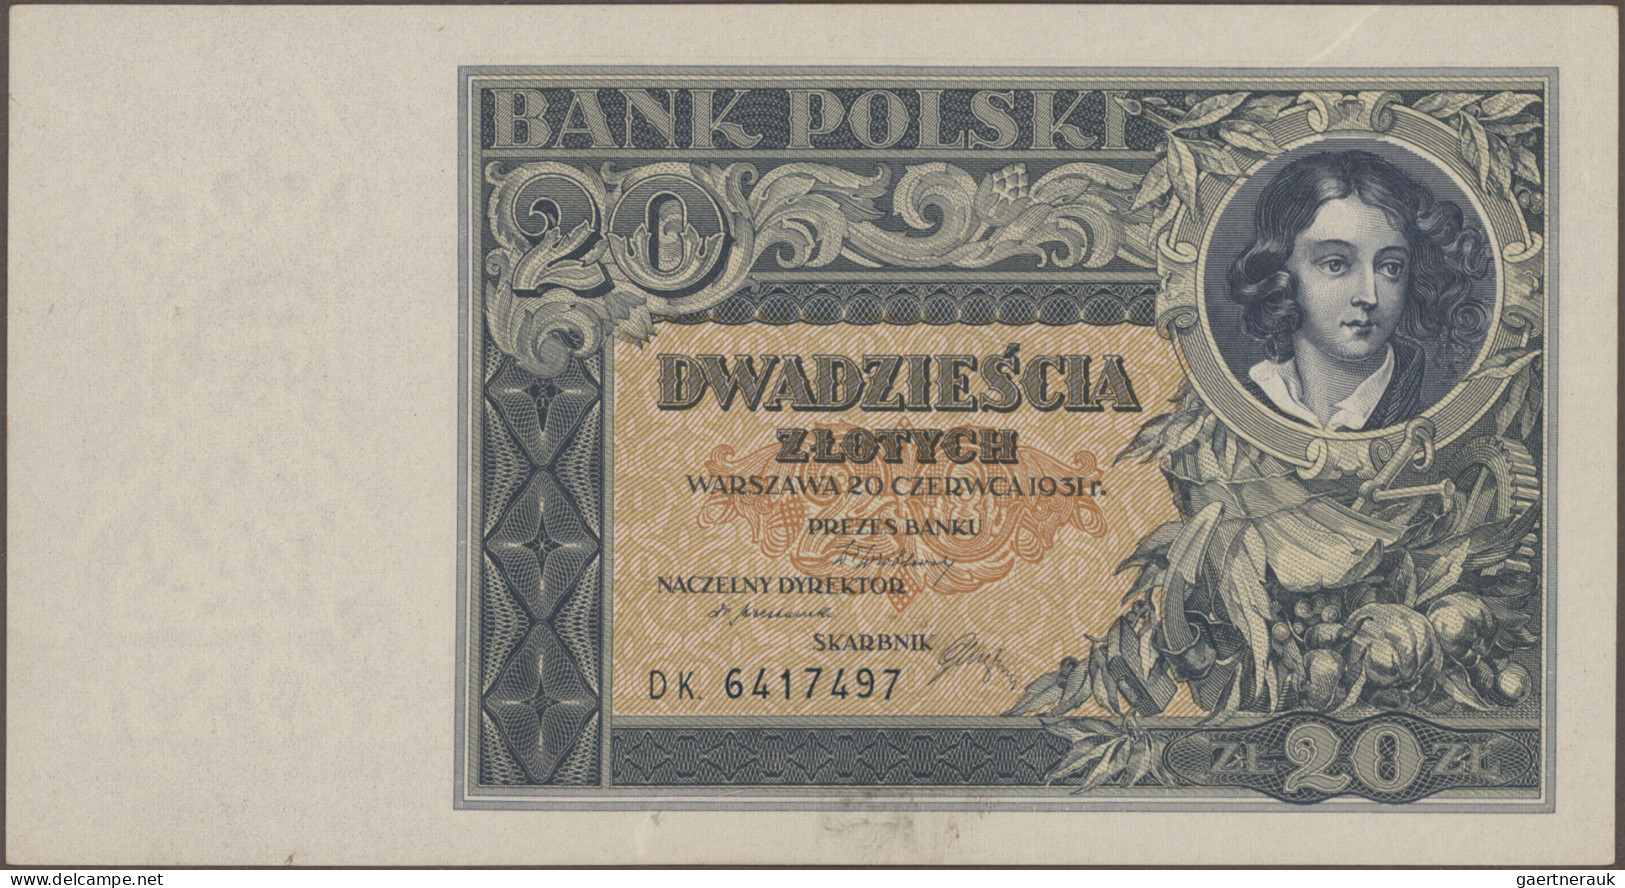 Worldwide: Huge collection with about 420 banknotes from all over the world, com